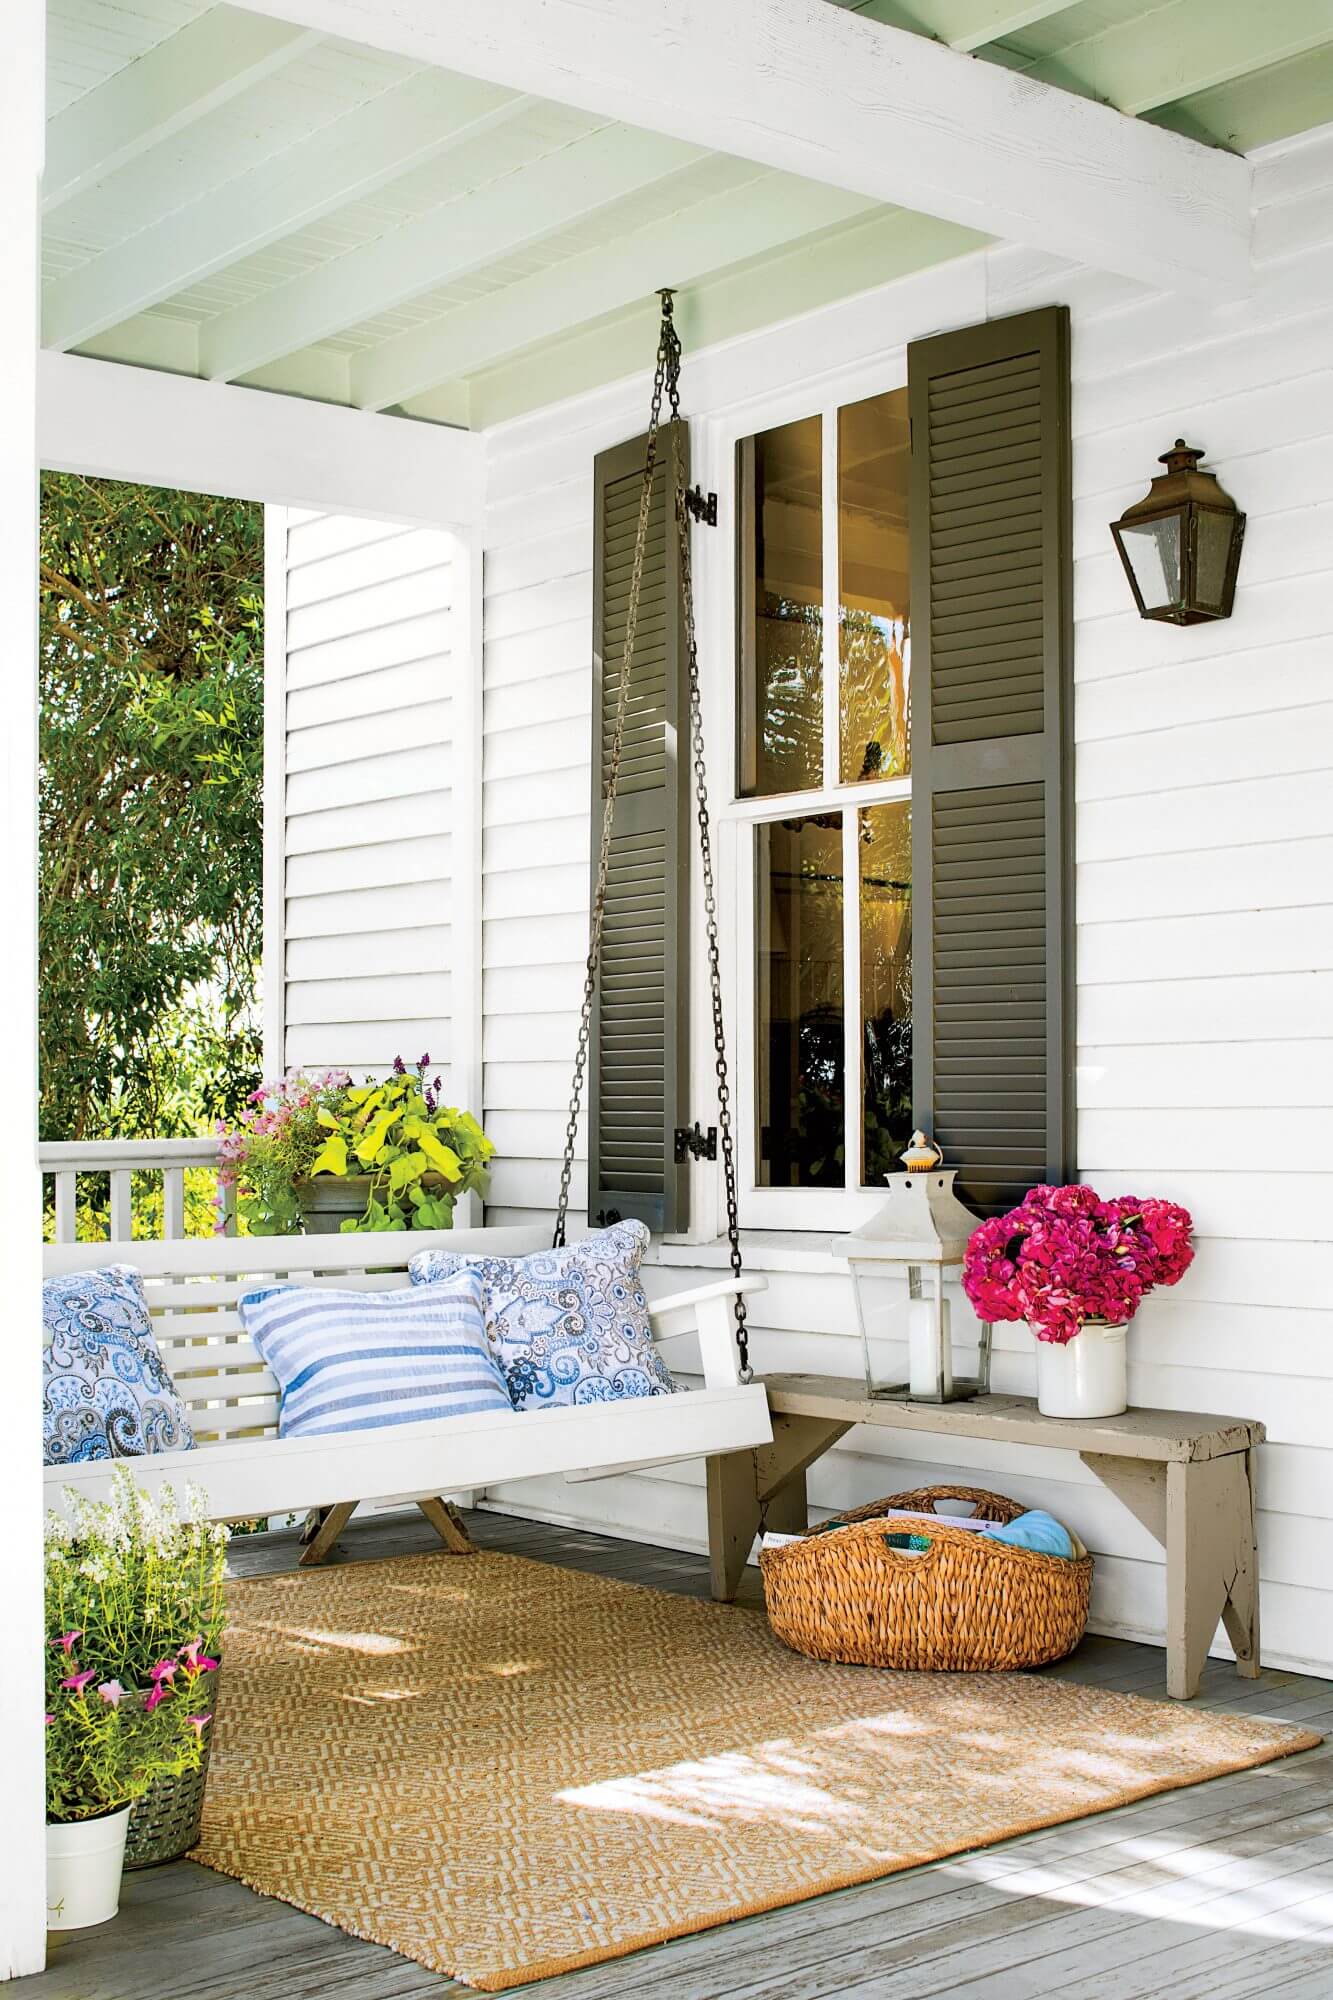 A swing can be a great addition to any porch. Source: Yahoo